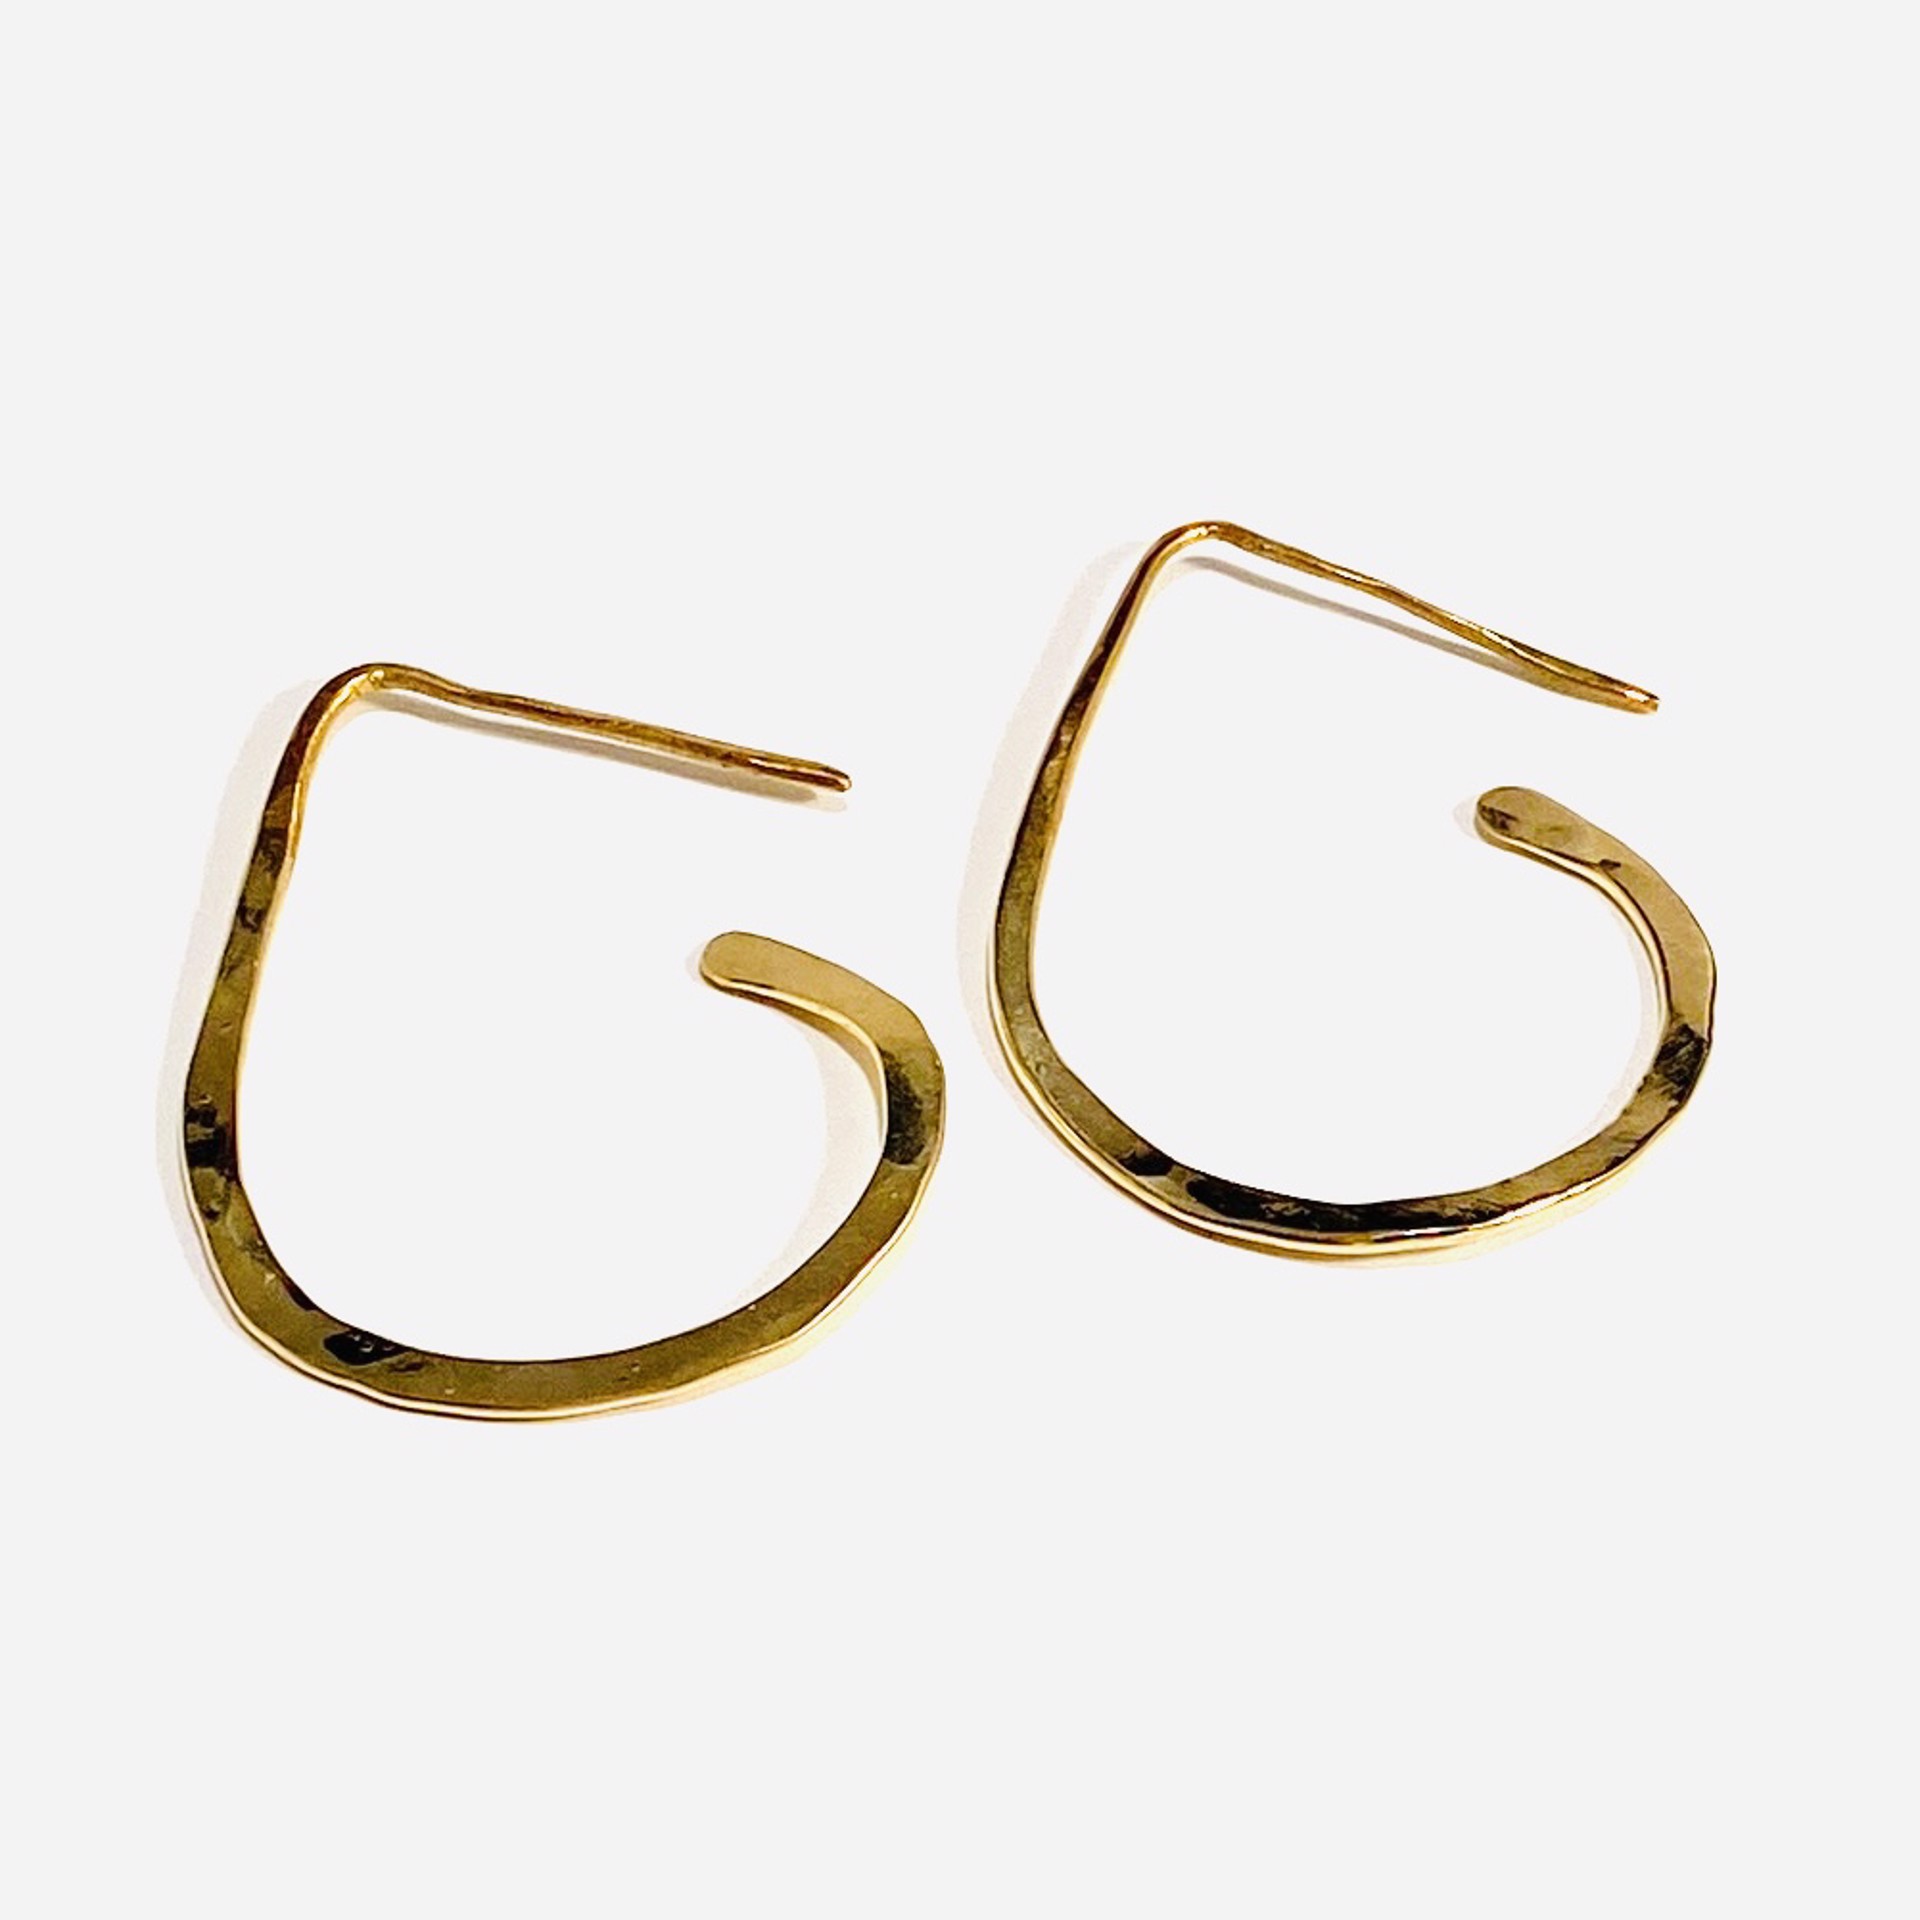 AB23-24 Hand Forged 14k GF Open Hoop Earrings by Anne Bivens